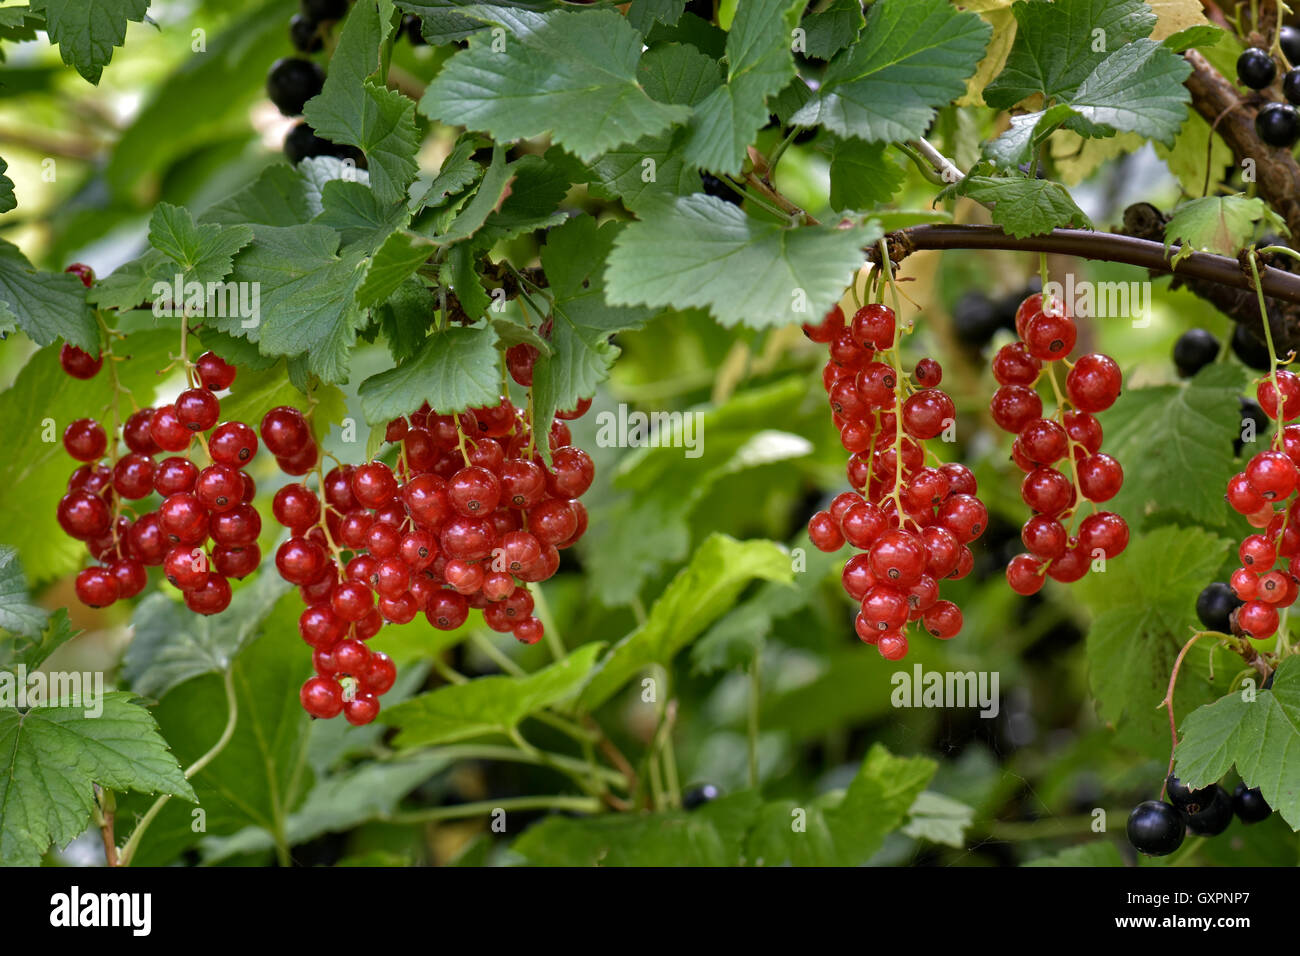 Ripe redcurrants ready for picking Stock Photo